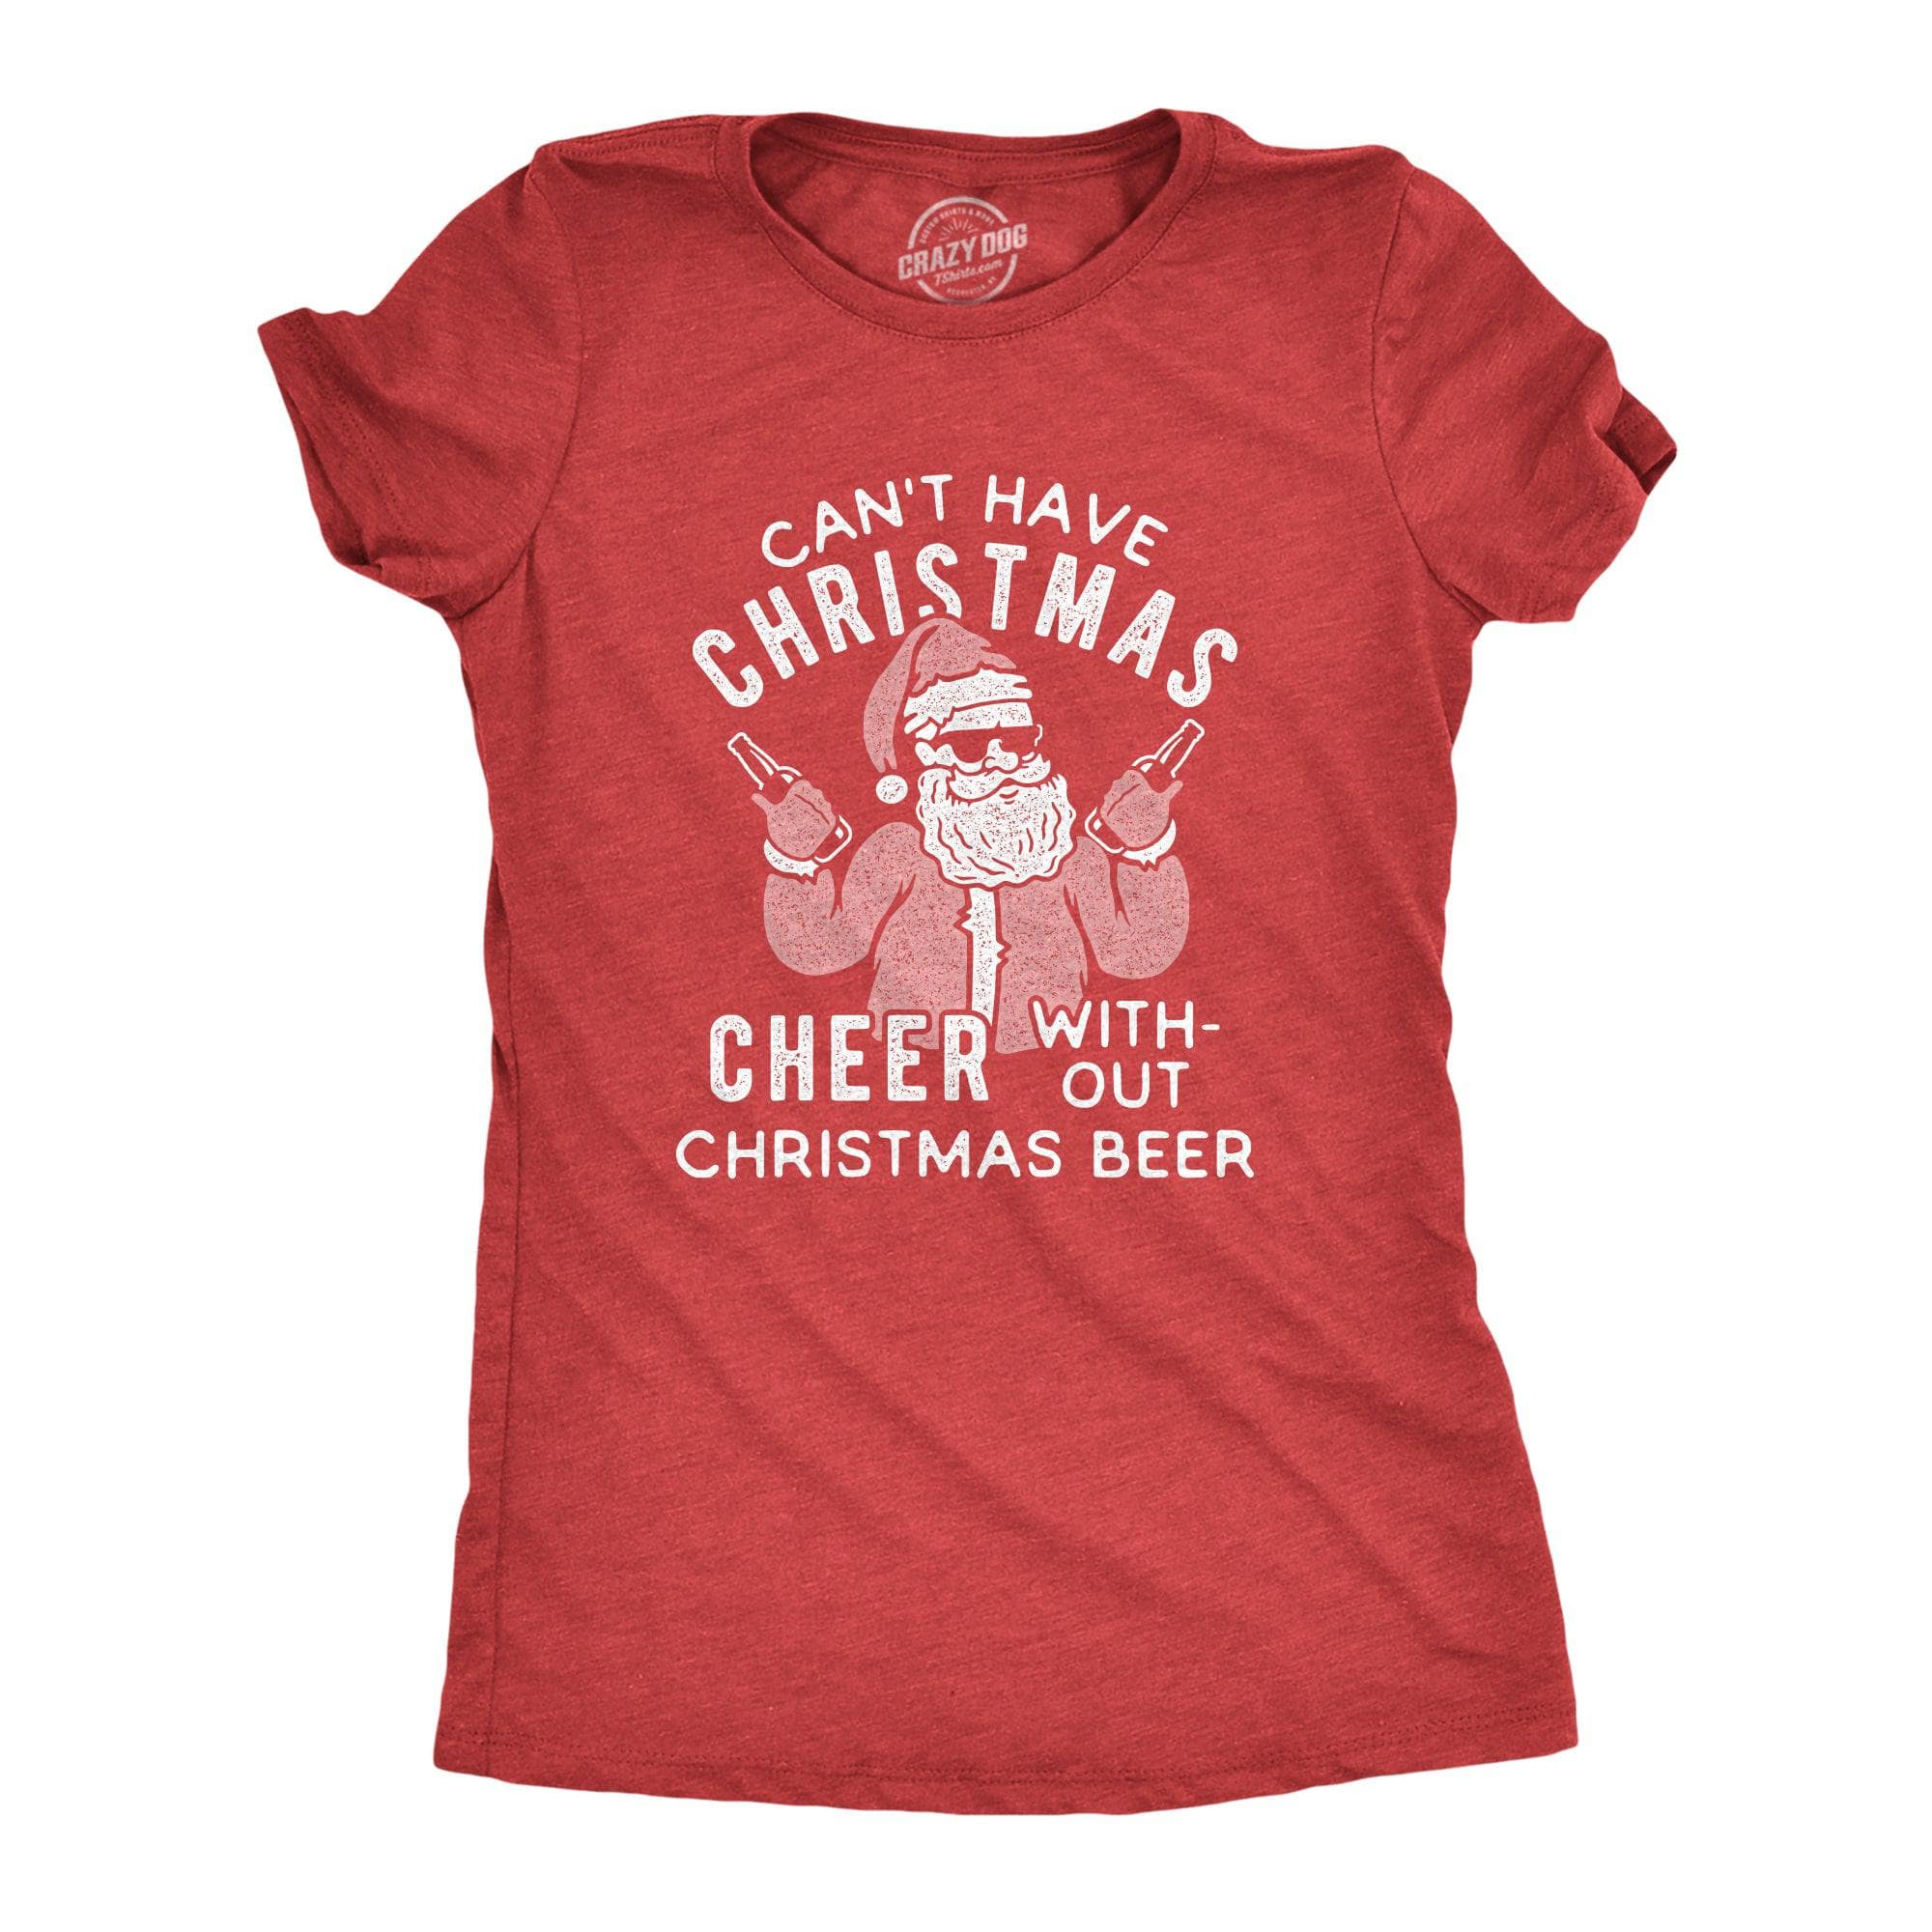 Can't Have Christmas Cheer Without Christmas Beer Women's Tshirt  -  Crazy Dog T-Shirts